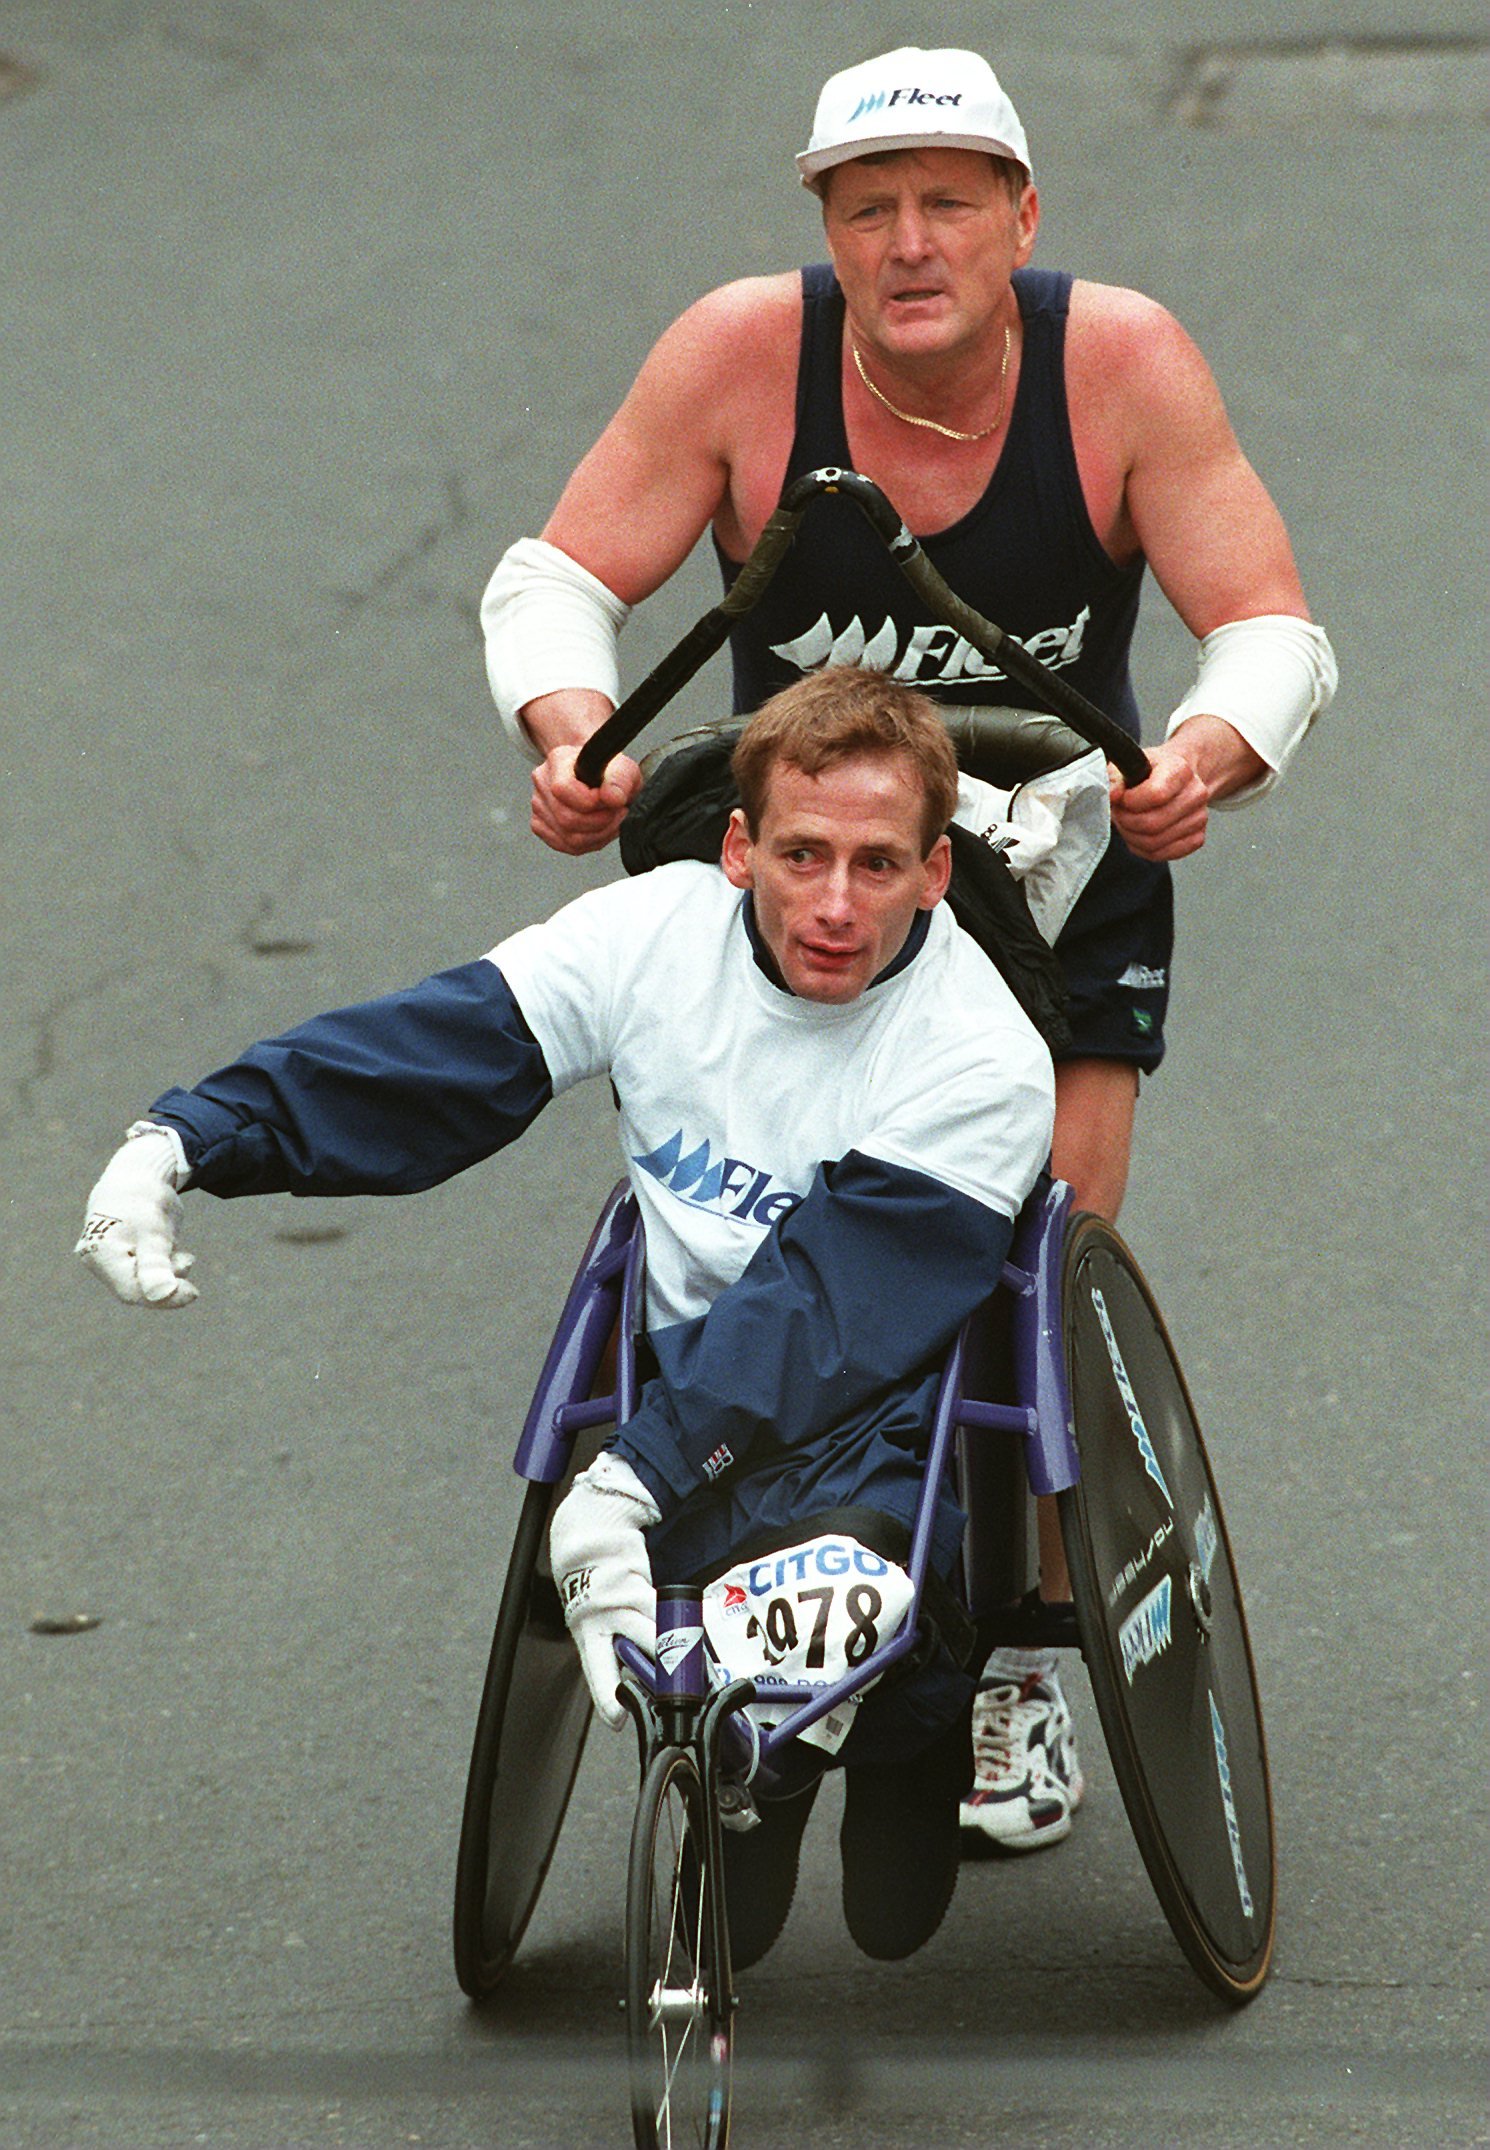 Dick Hoyt and his son Rick participate in the Boston Marathon on April 20, 1998. | Source: Getty Images